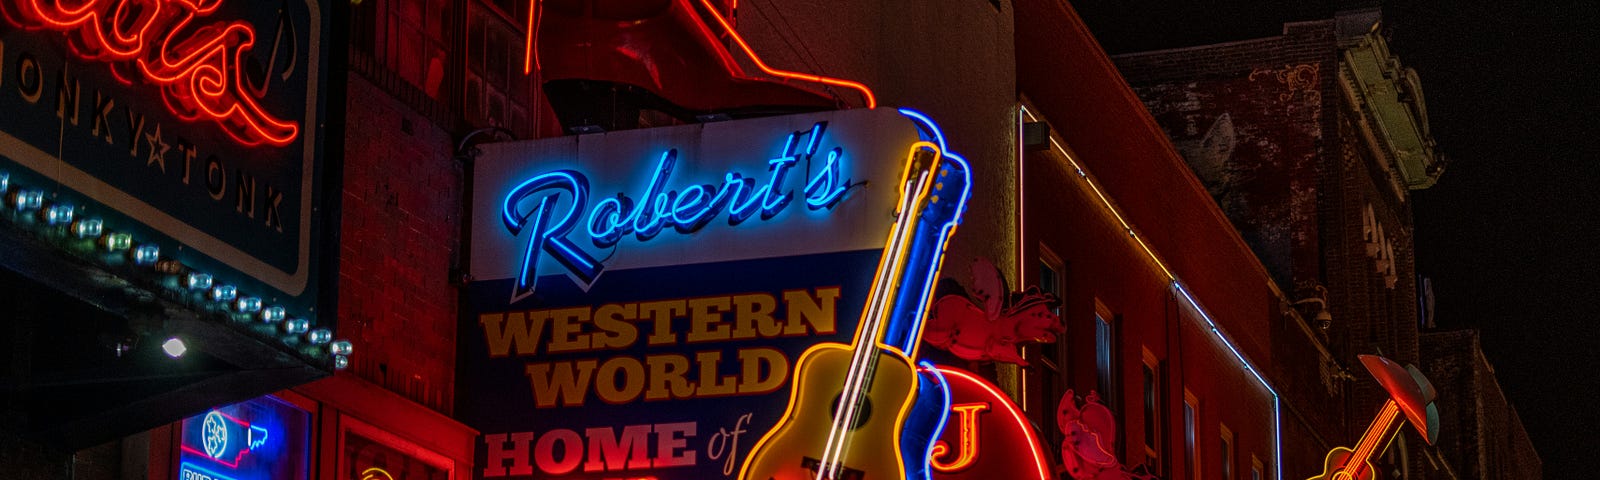 Nighttime street scene on Broadway in Downtown Nashville. Neon signs for Robert’s Western World, Jack’s BarBQue, and The Stage are in the background.